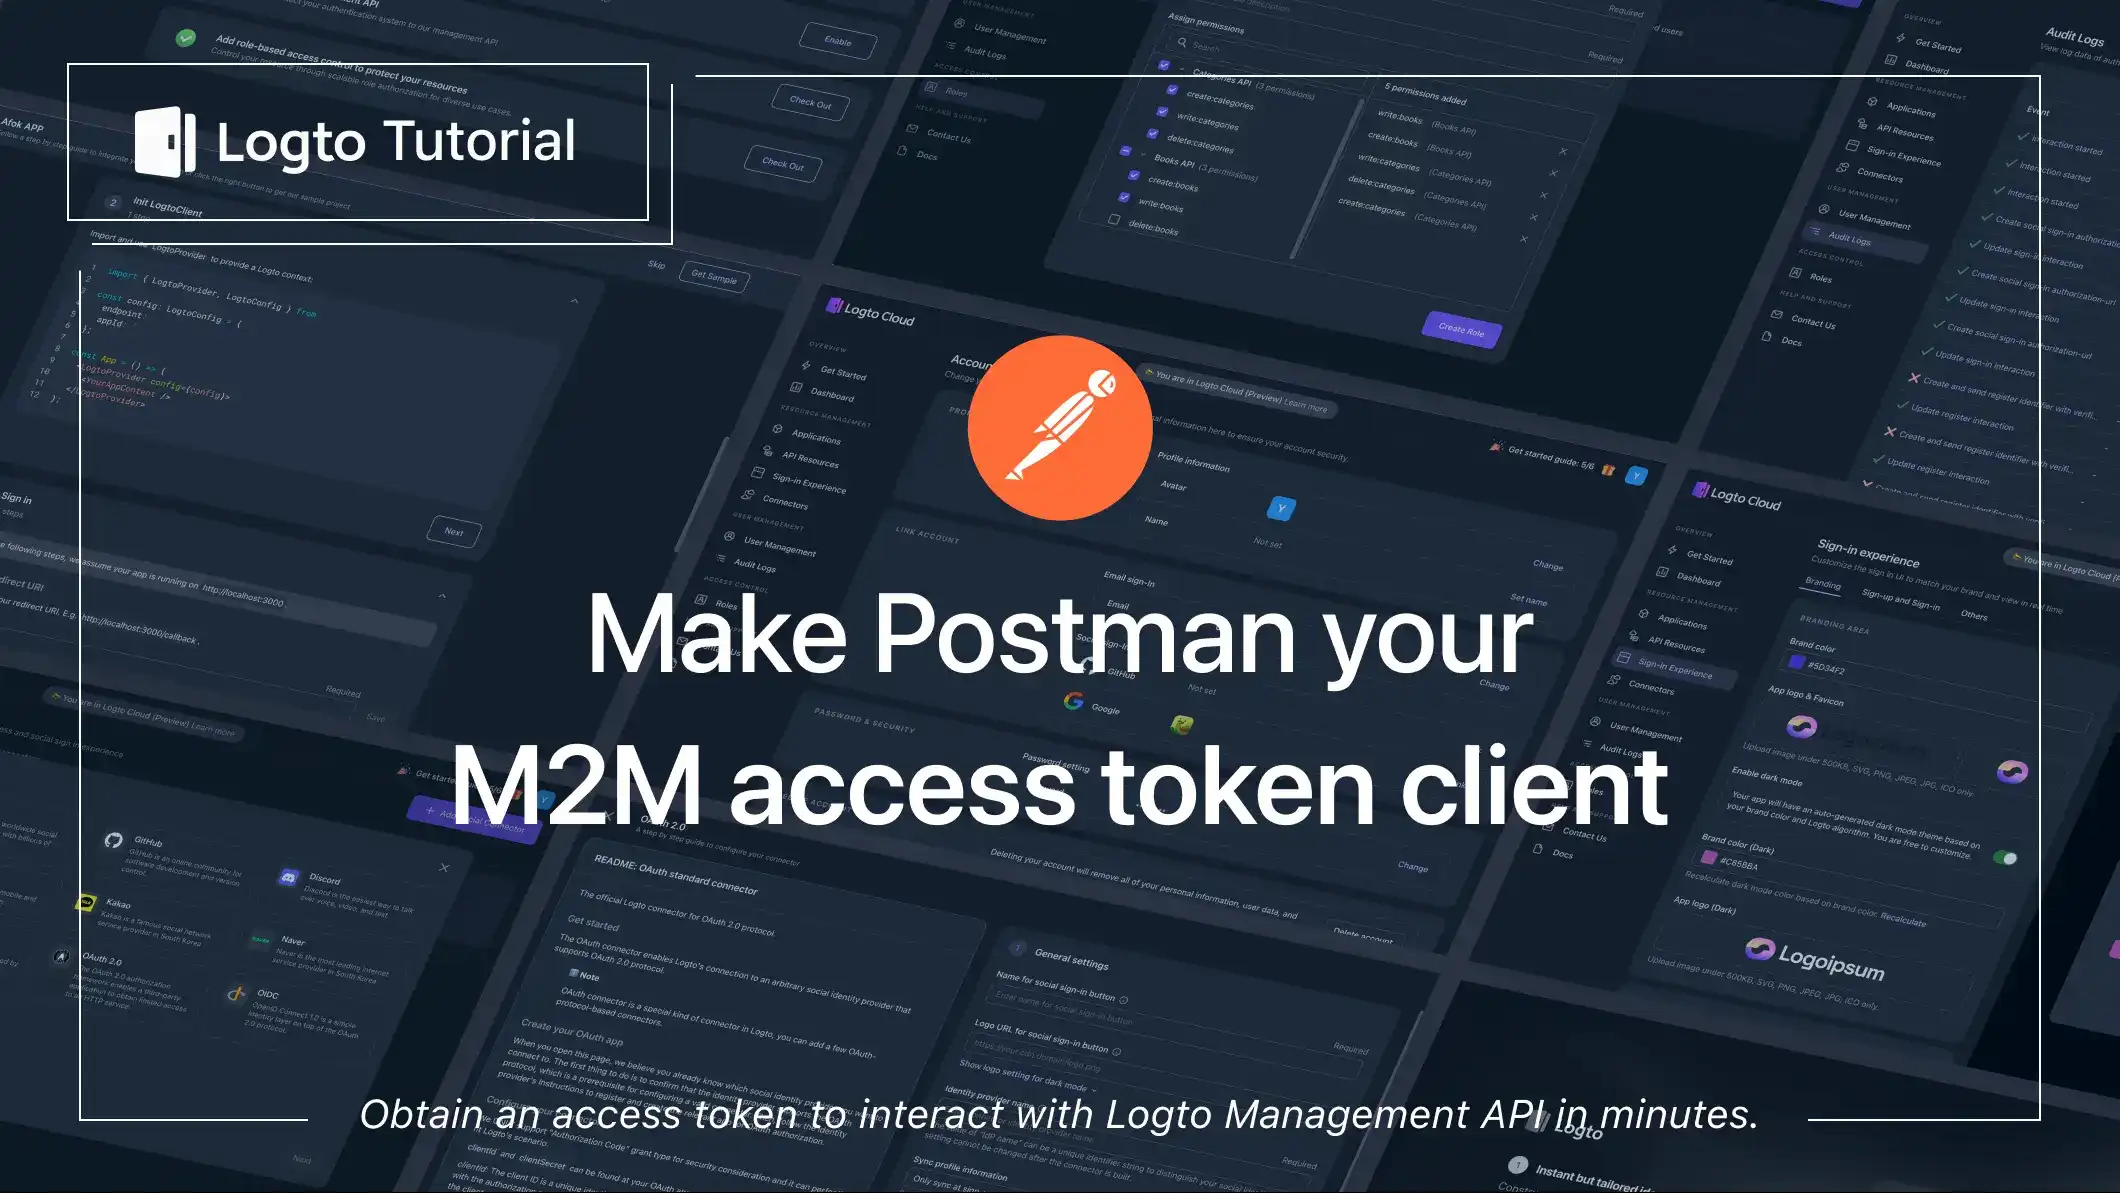 Obtain M2M access tokens in minutes with Postman